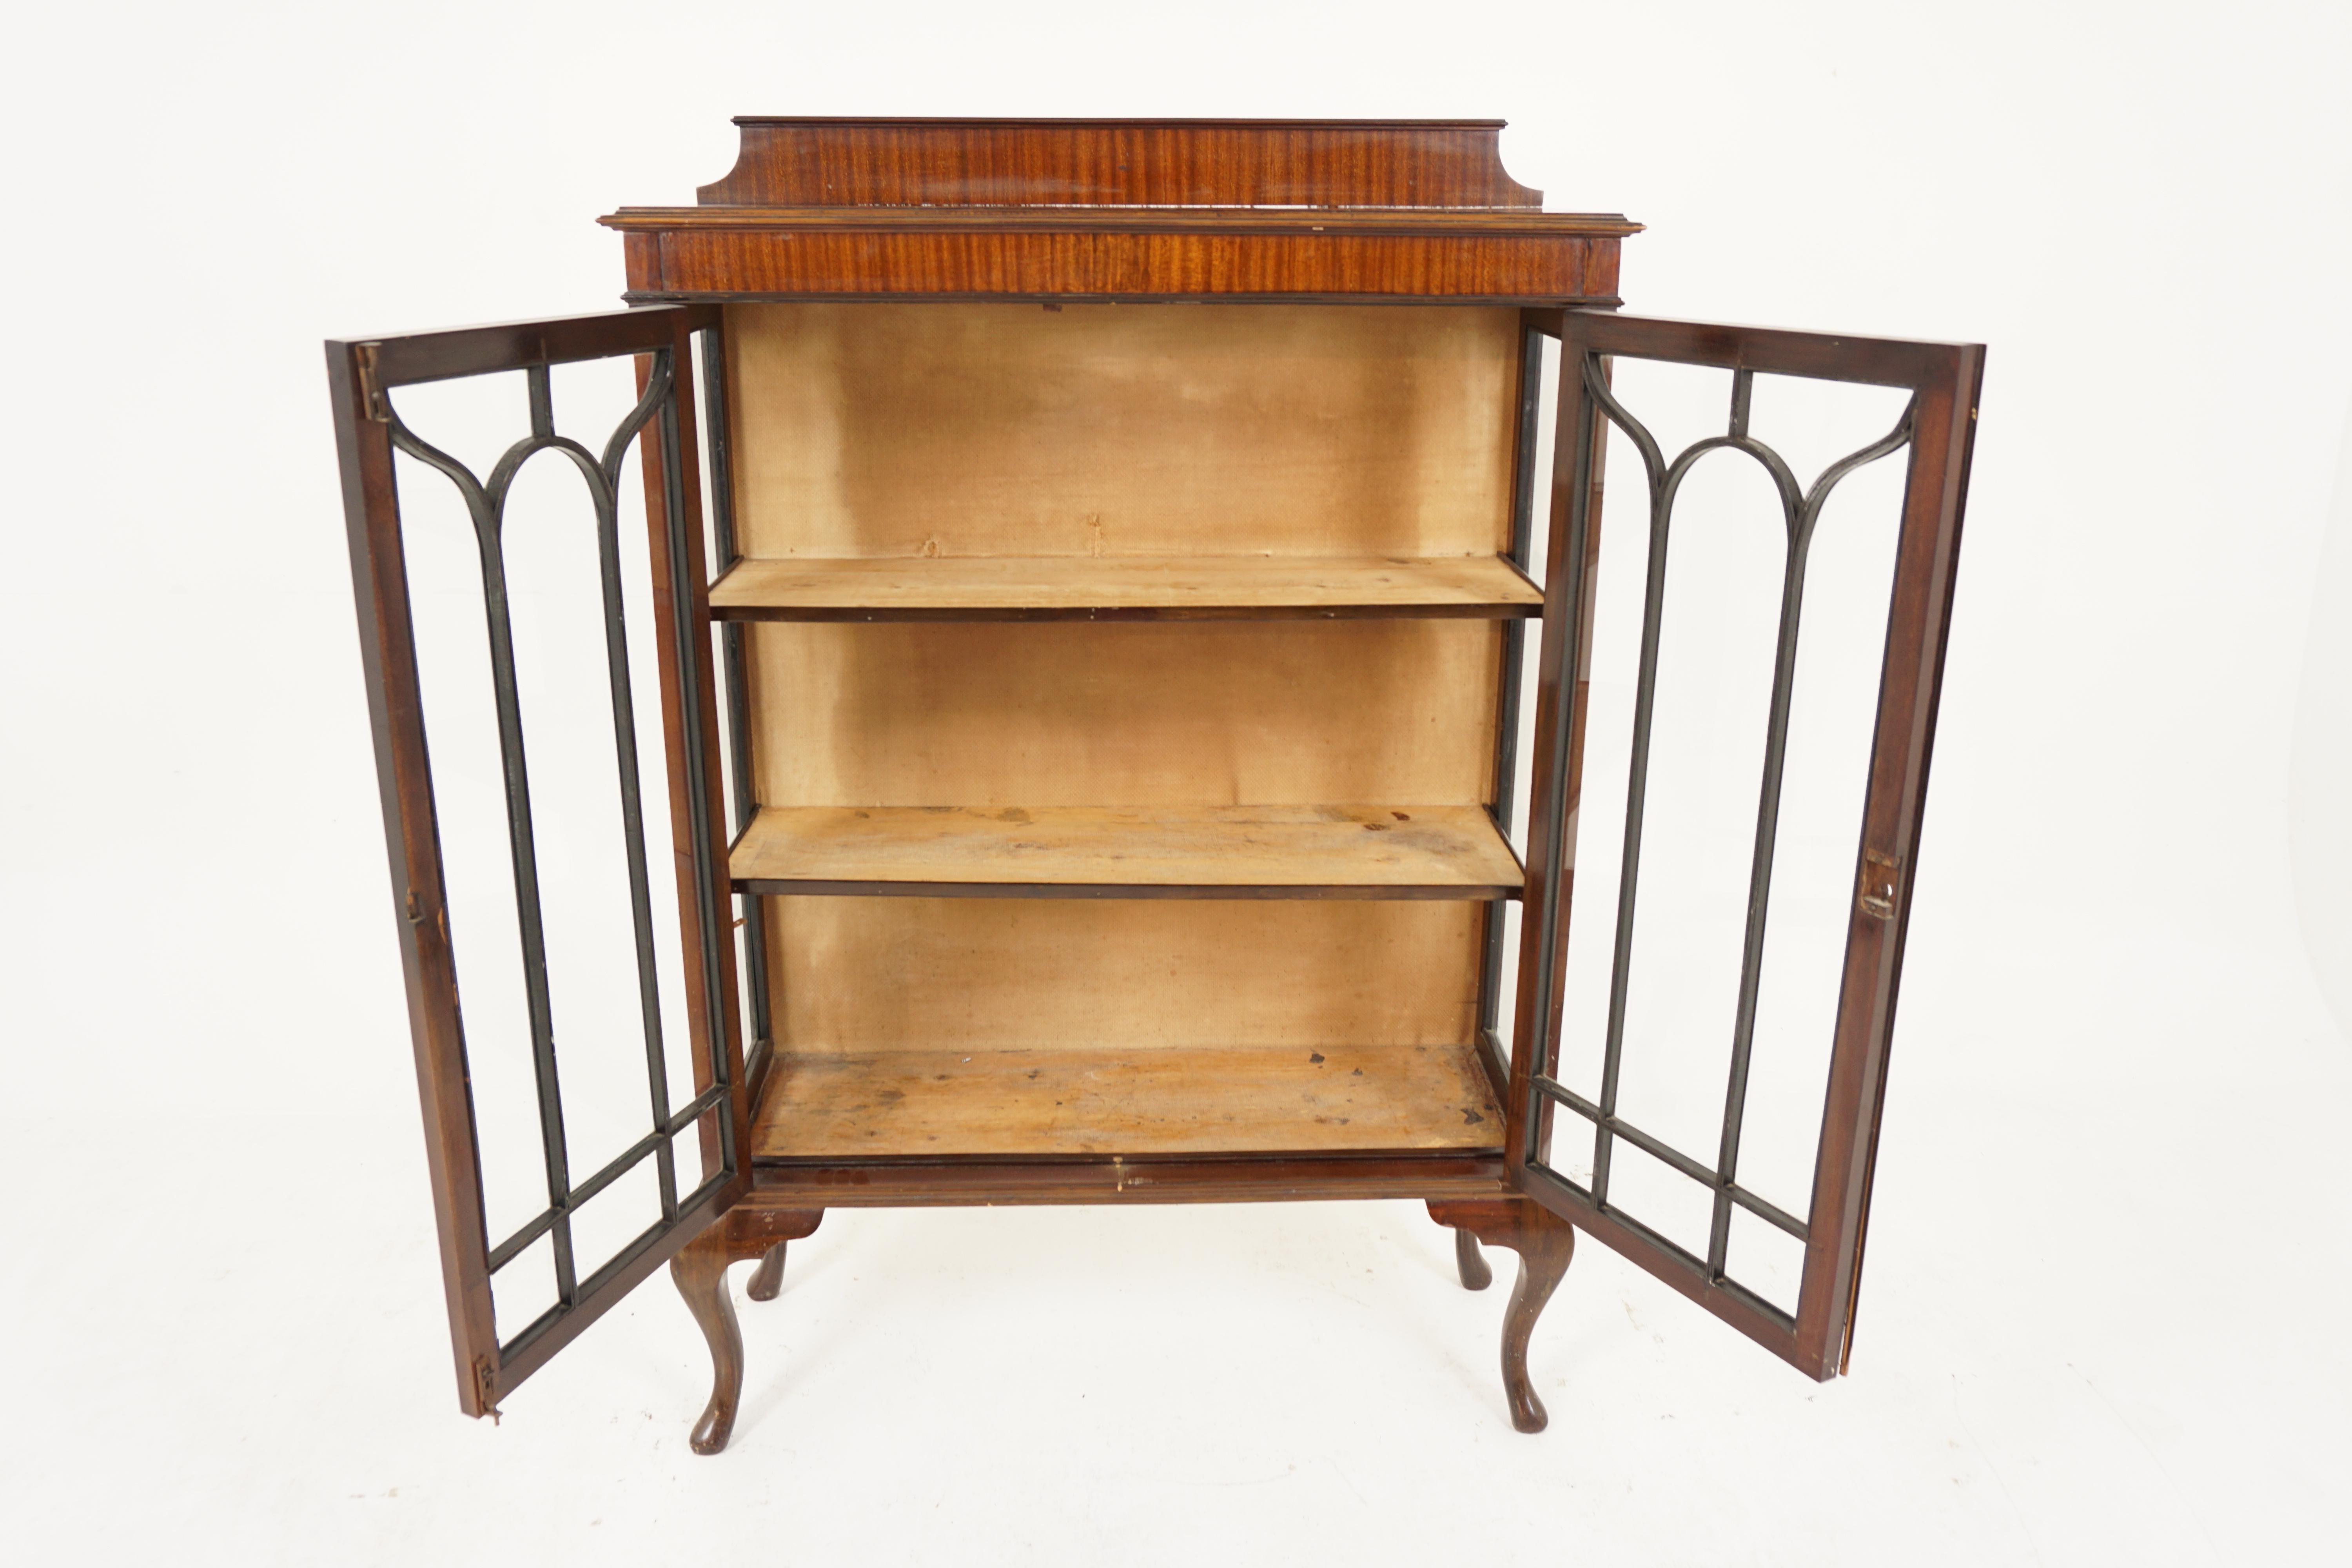 Antique Walnut China Cabinet, Display, Scotland 1920, B2683

Scotland 1920
Solid walnut
Original finish
Rectangular moulded top with gallery at the back
Pair of original glass doors with moulded front open to reveal two wooden shelves
All